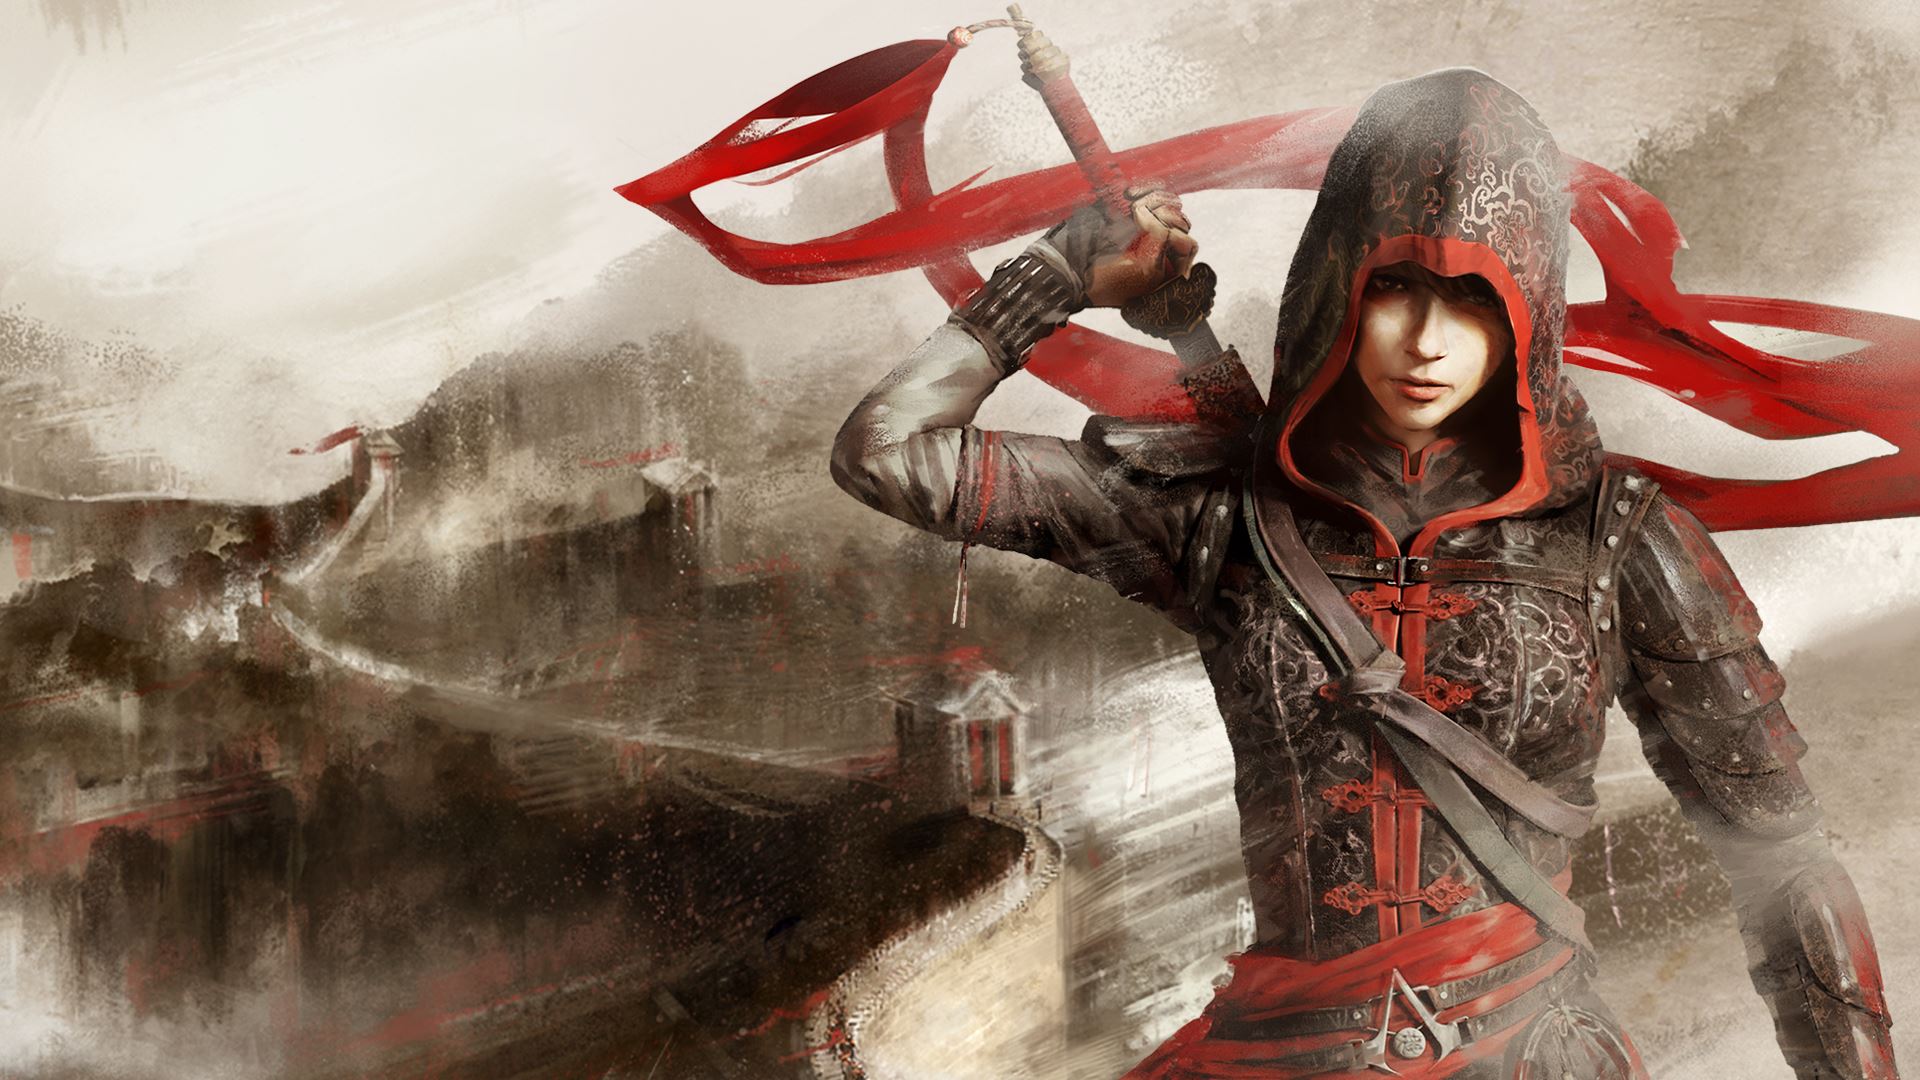 Review: Assassin's Creed Chronicles: China